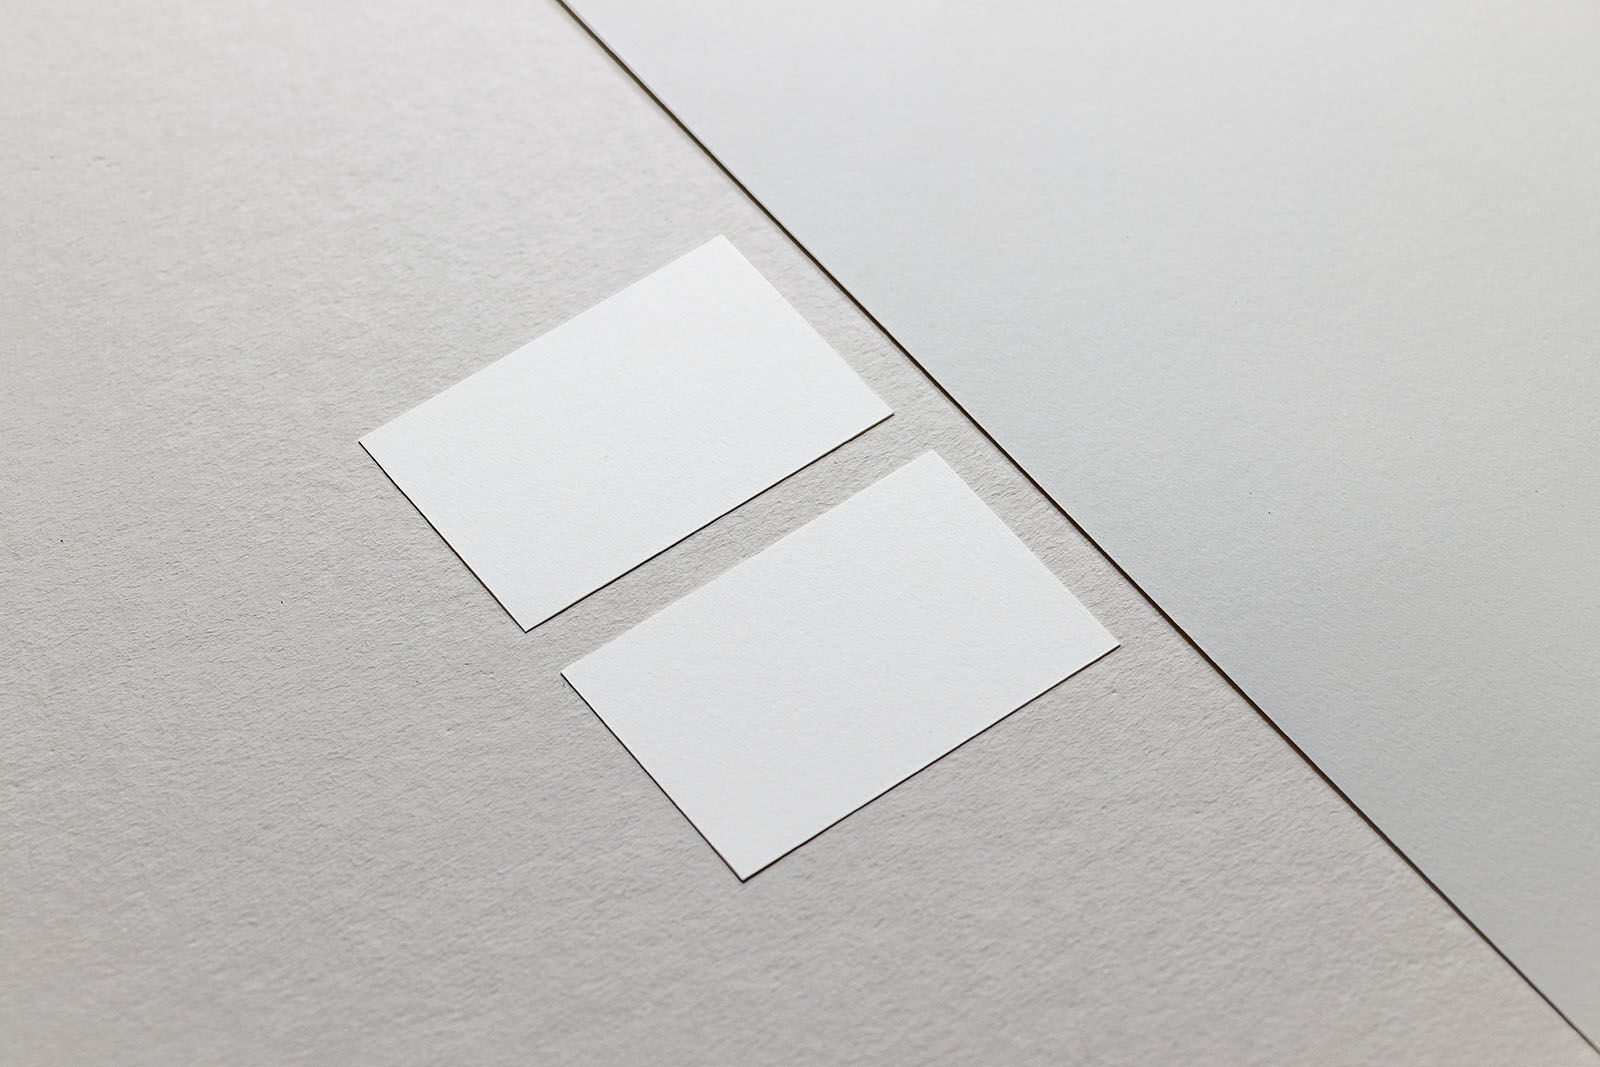 Perspective View of 2 Horizontal Business Cards on Paper Mockup FREE PSD